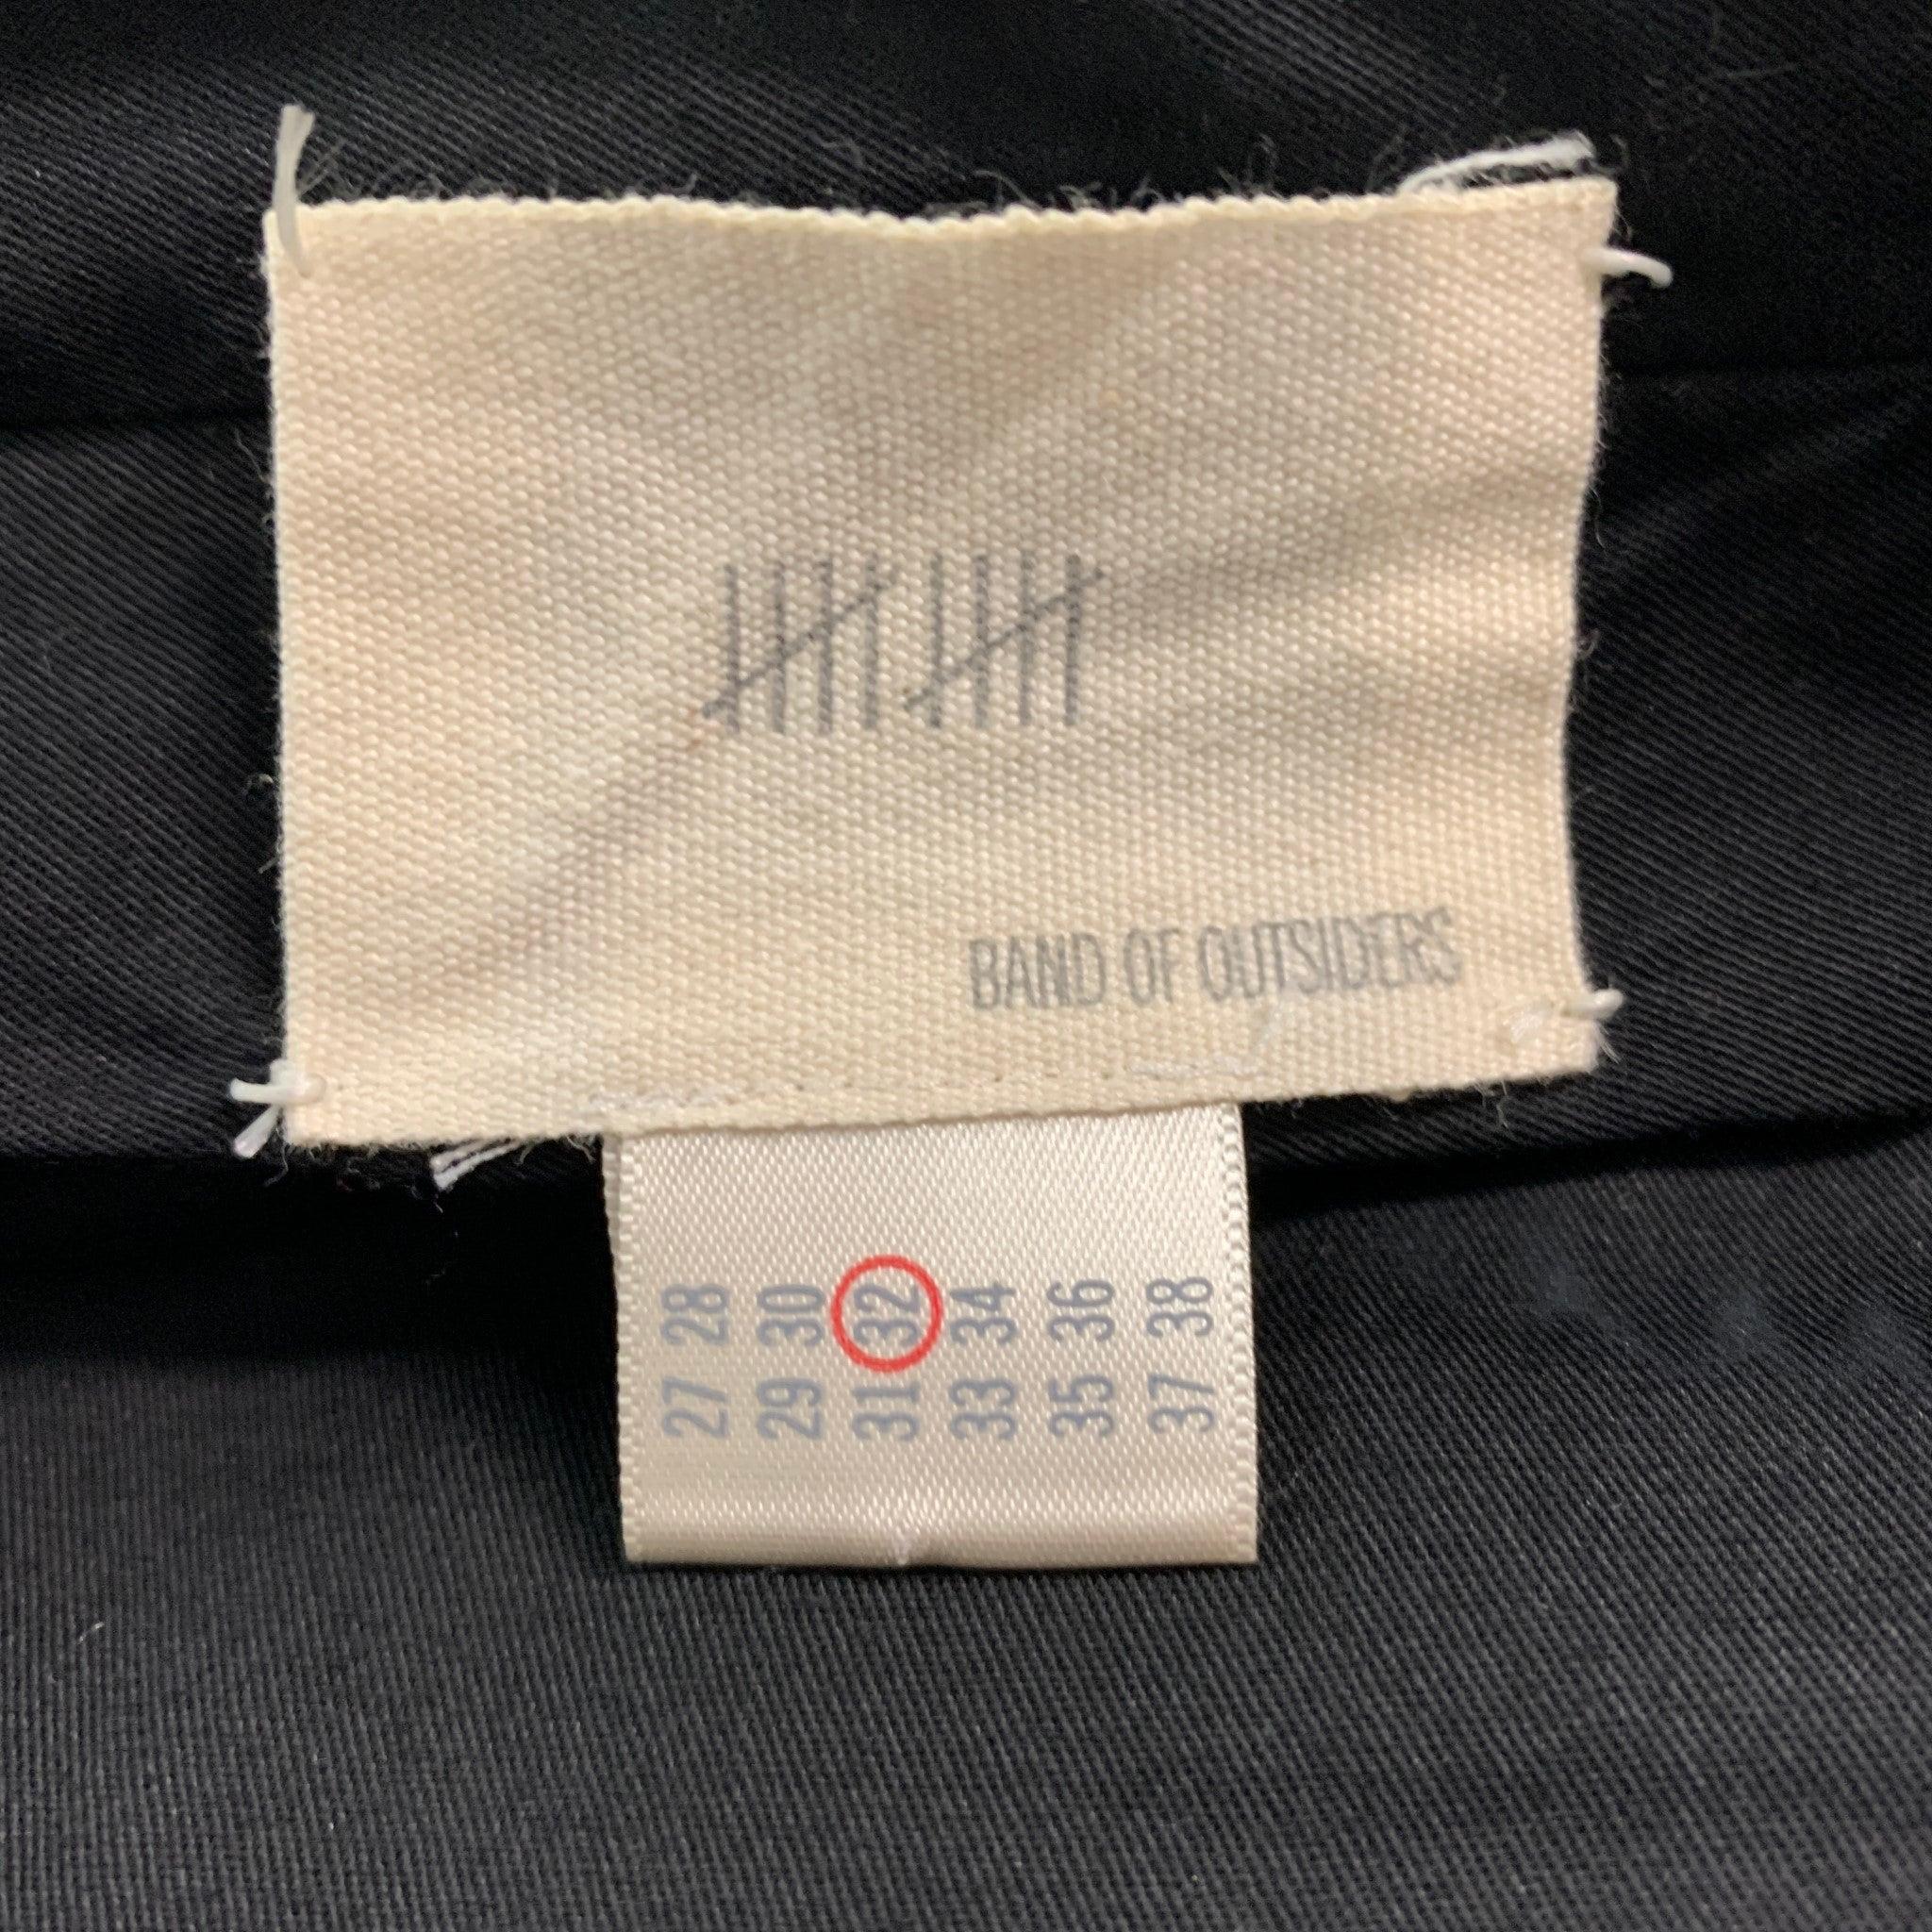 BAND OF OUTSIDERS Size 32 Black Solid Wool Zip Fly Dress Pants In Excellent Condition For Sale In San Francisco, CA